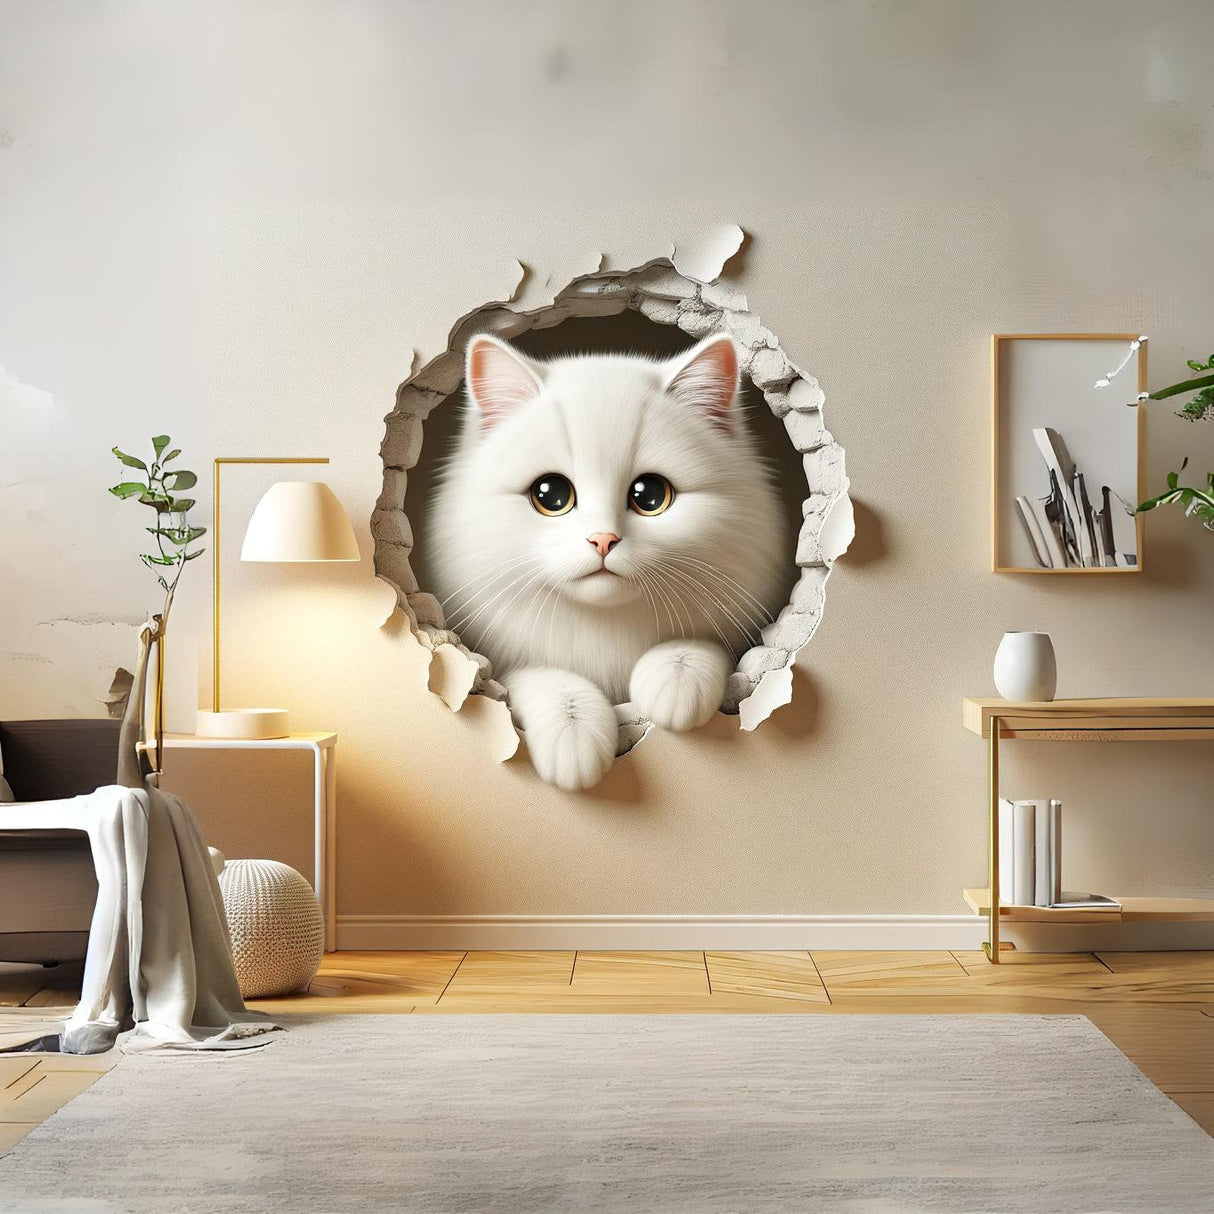 3D Cute White Cat Wall Sticker - Nursery Decor with Charming Kitty Illusion